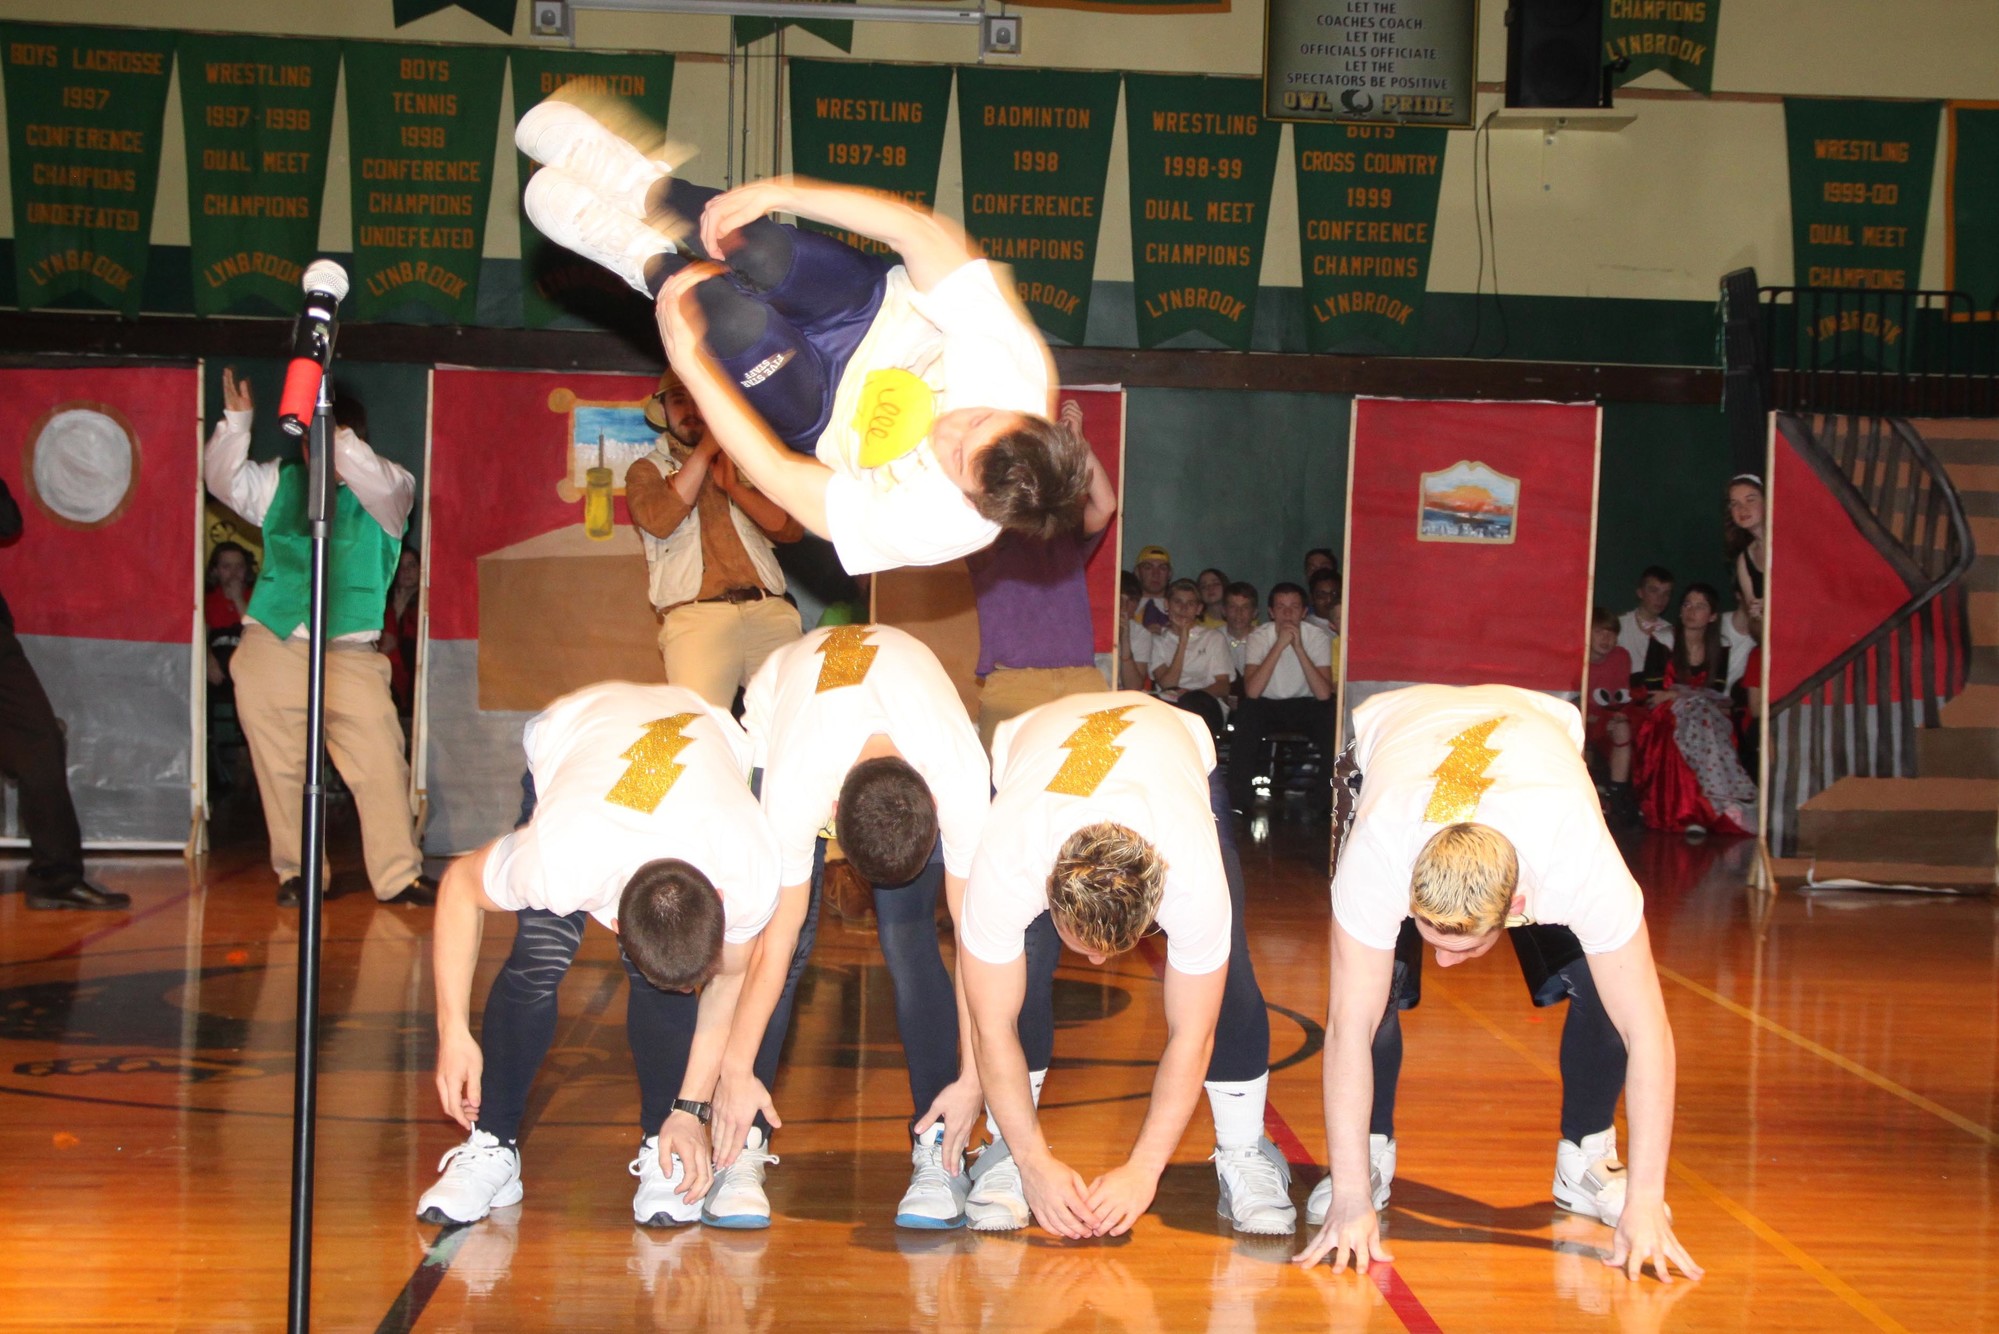 The senior boys' dance involved some aerial flips that wowed the audience.  Their class took second place overall.